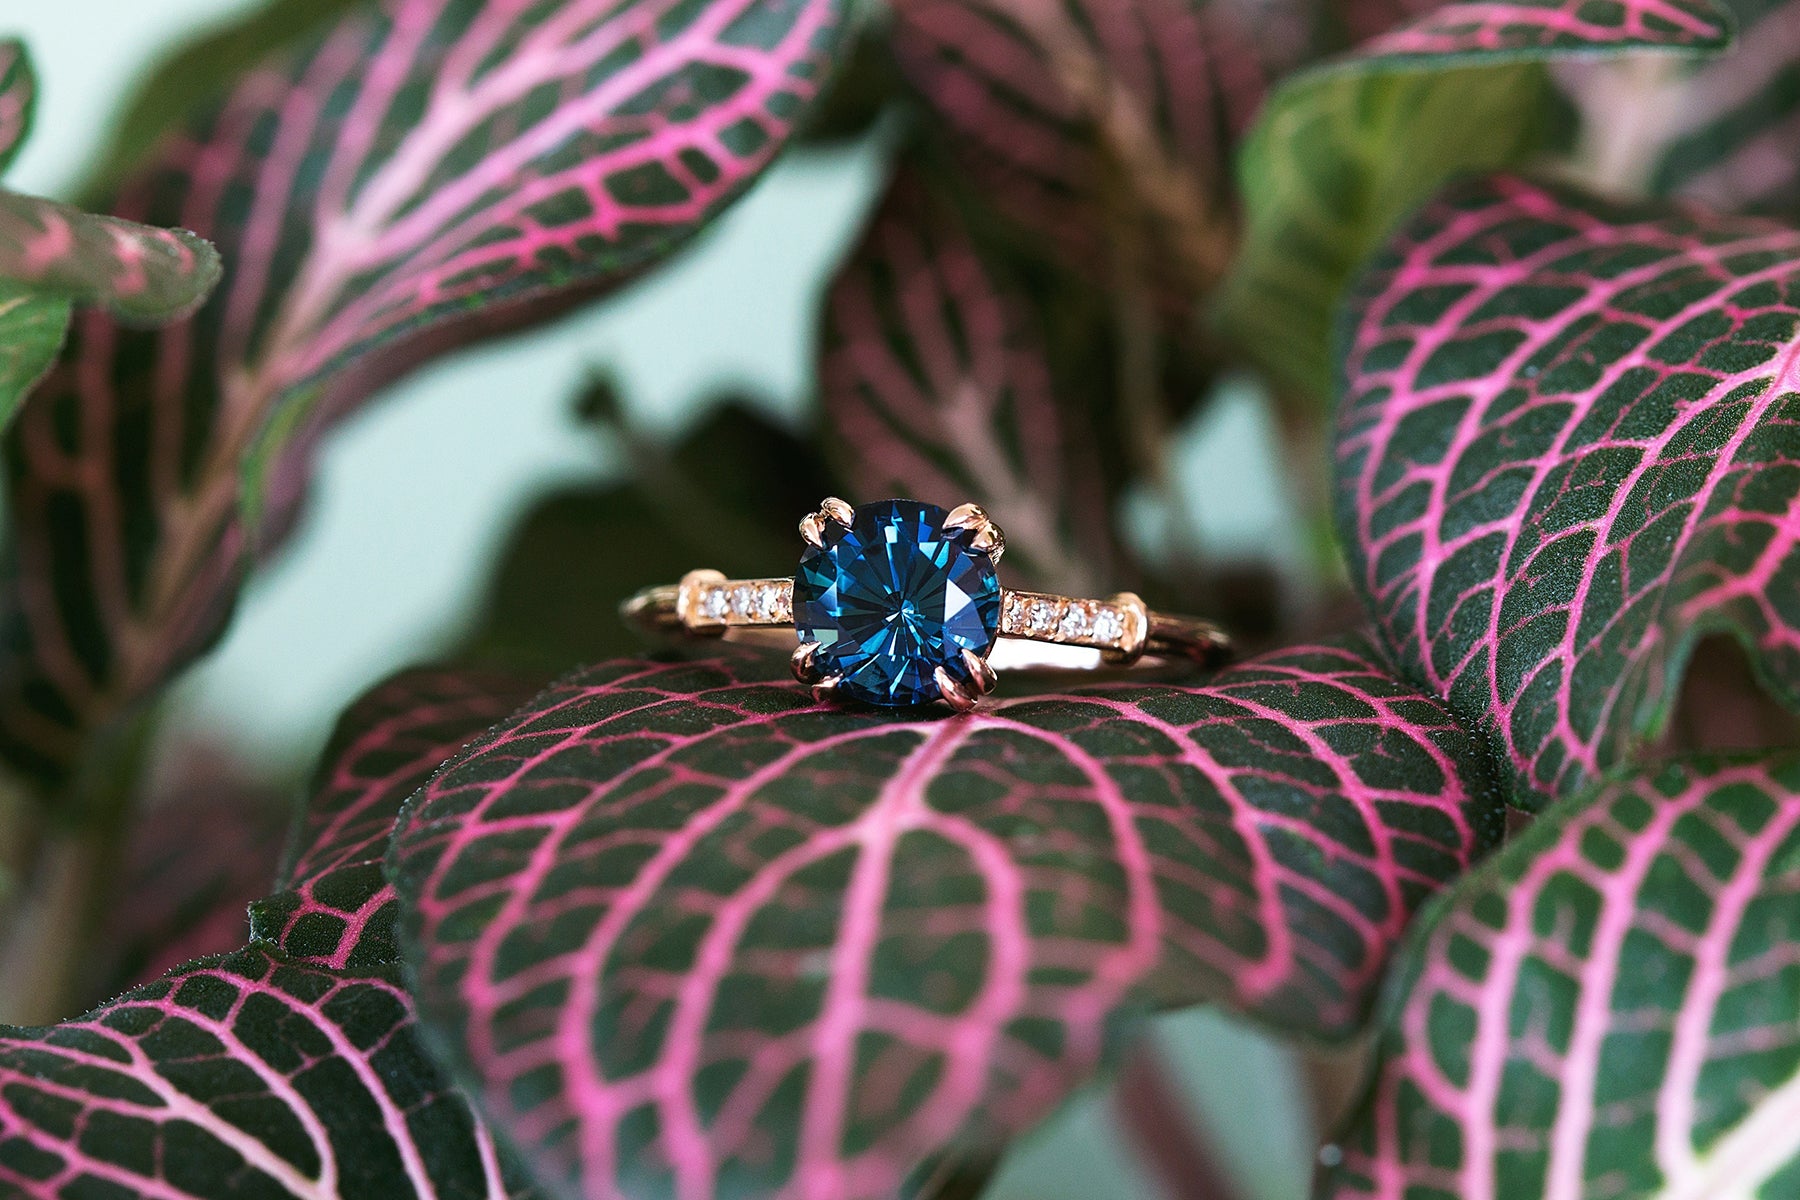 Natural Teal Sapphire Fotini Ring - S. Kind & Co